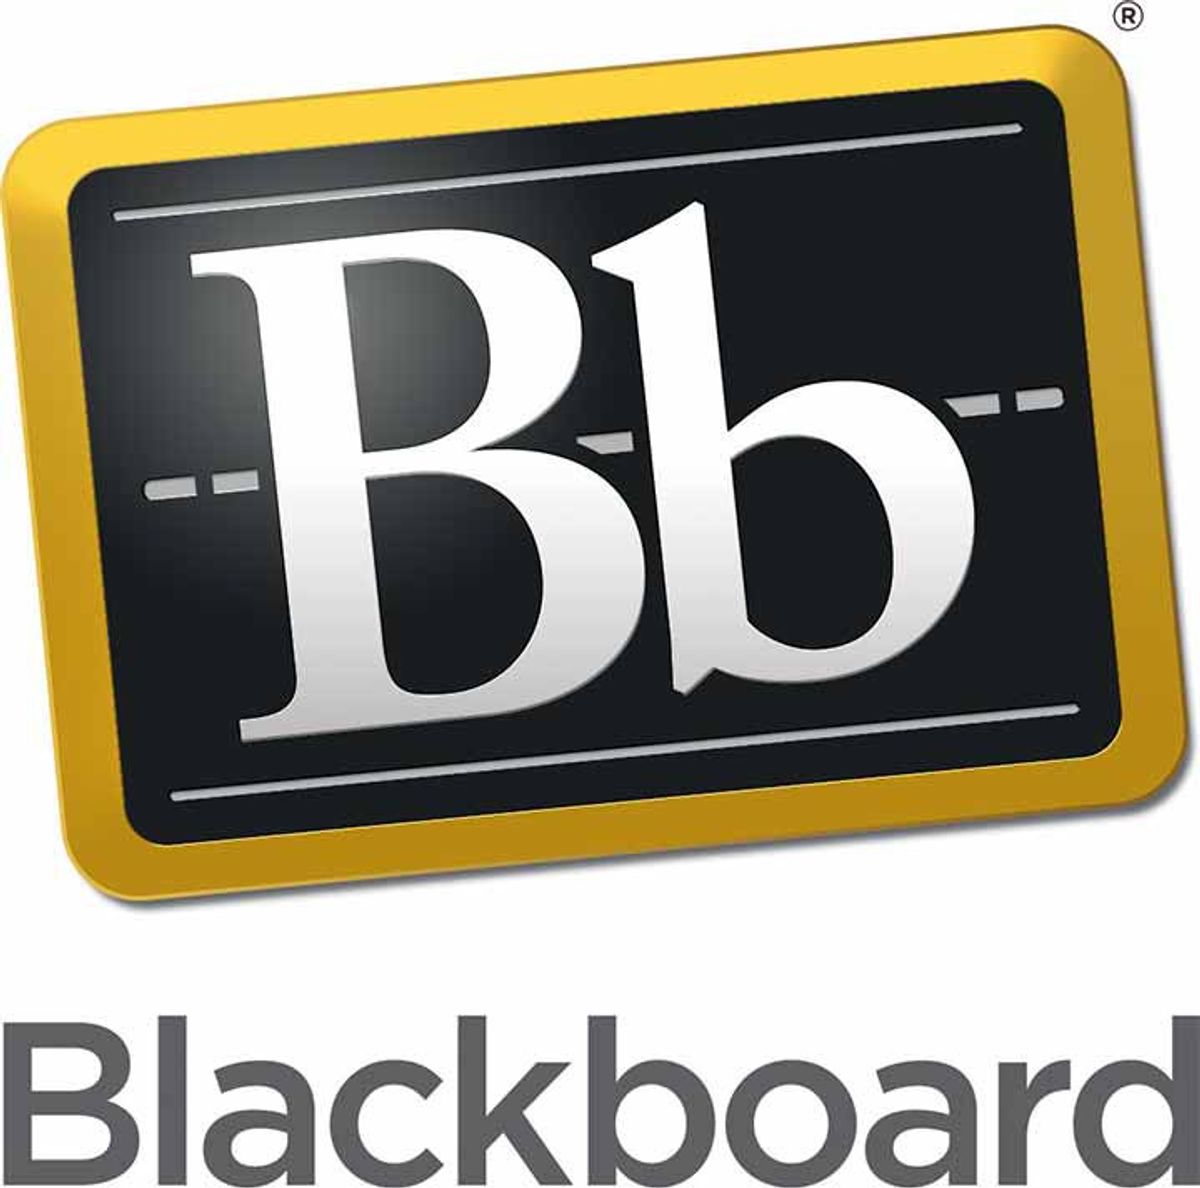 Why Blackboard Is The Literal Worst